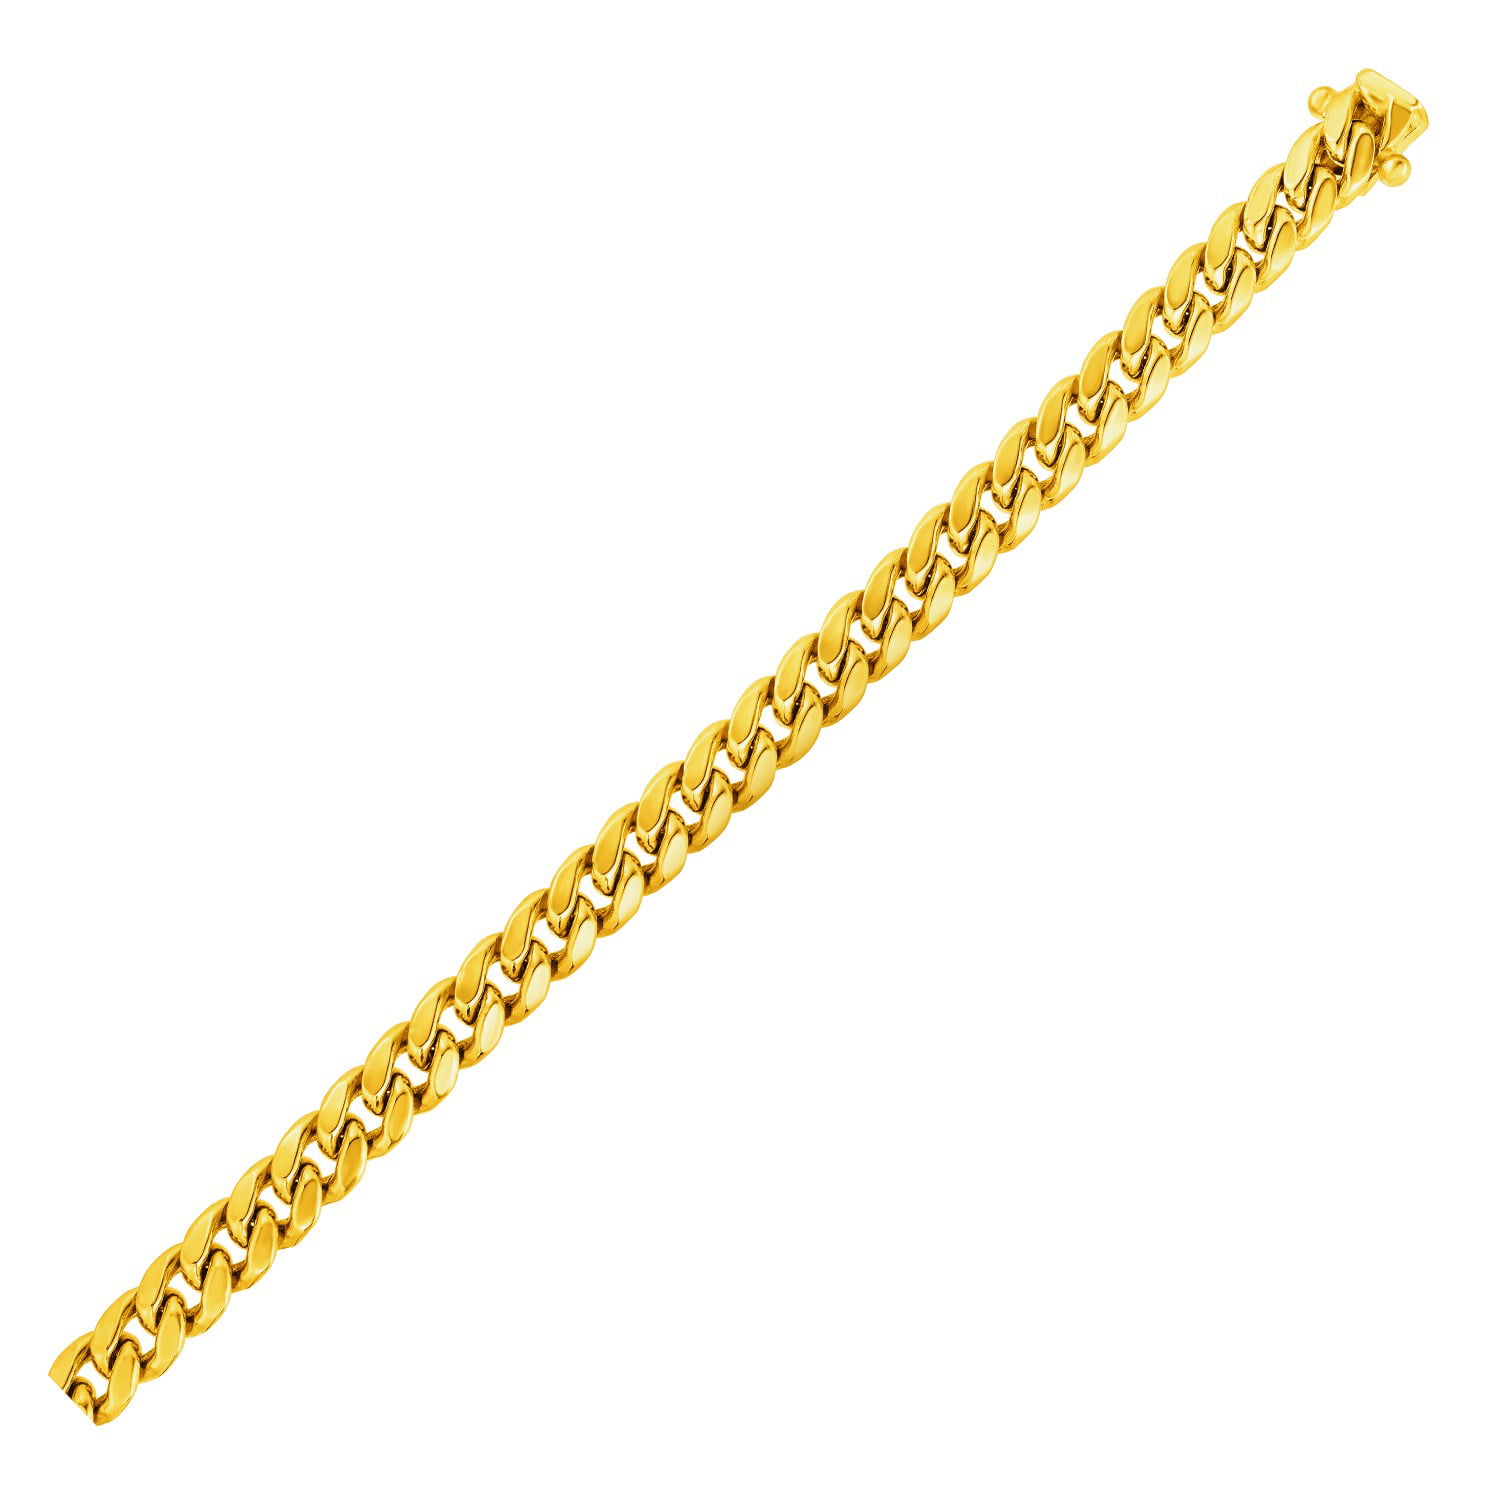 PriceRock 10k Gold 1.75mm Polished 22 inch Figaro Chain Necklace 22 Inches